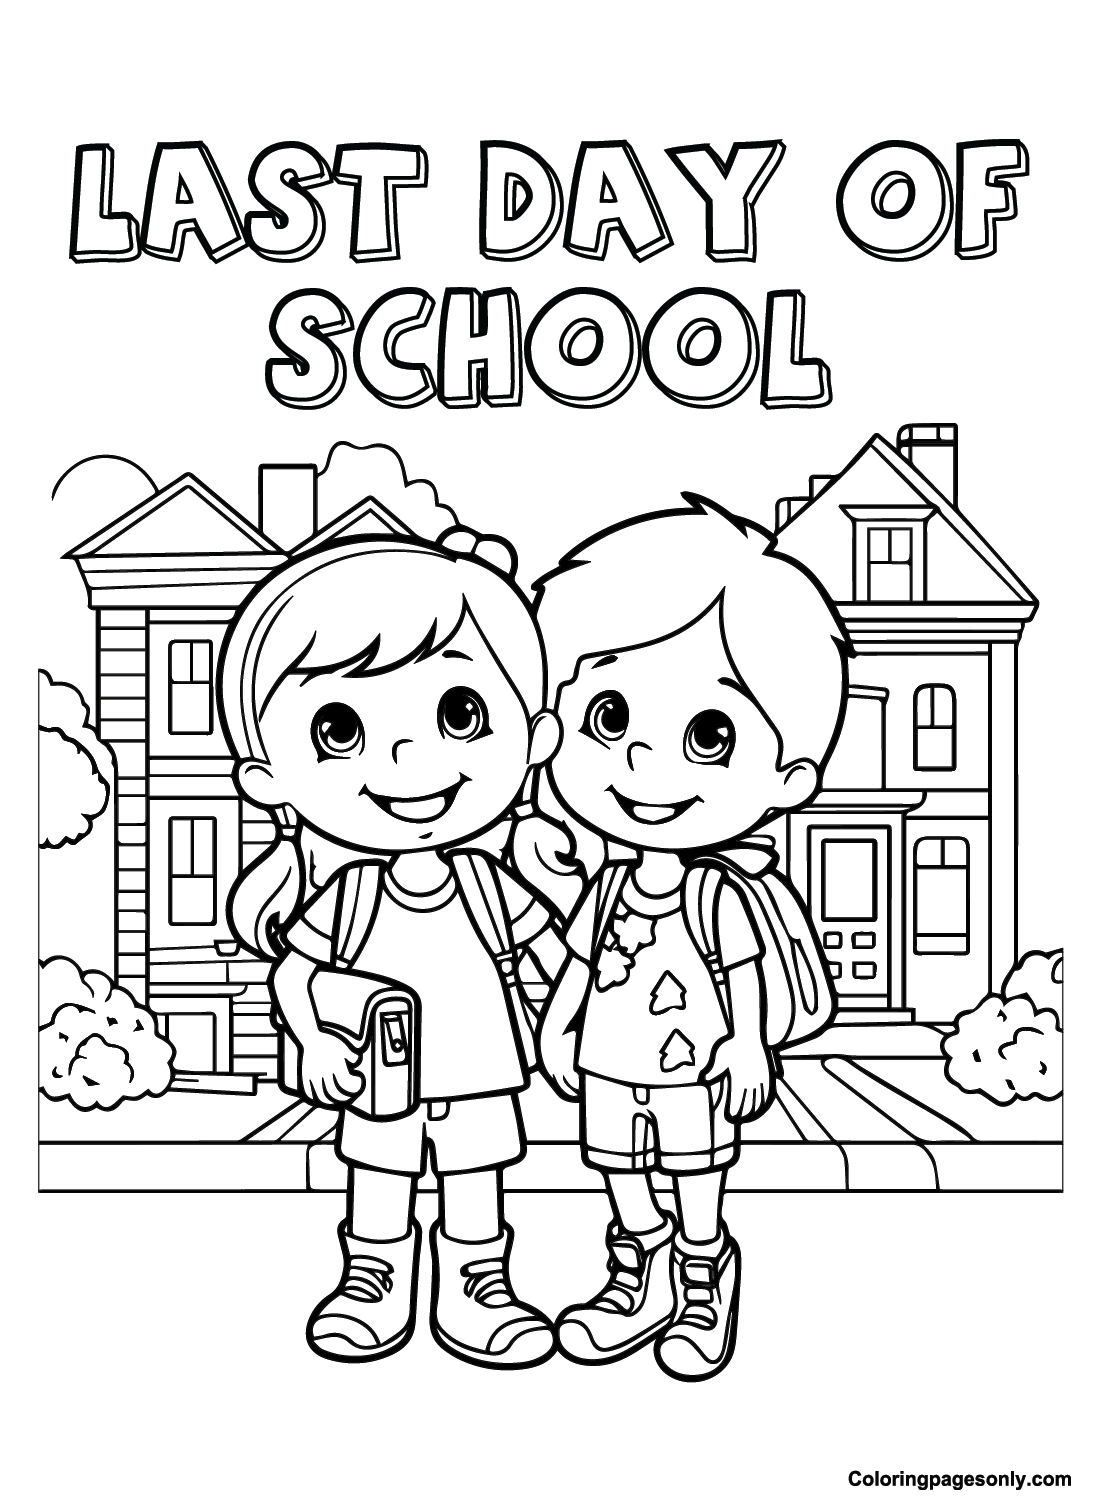 Last day of school coloring pages